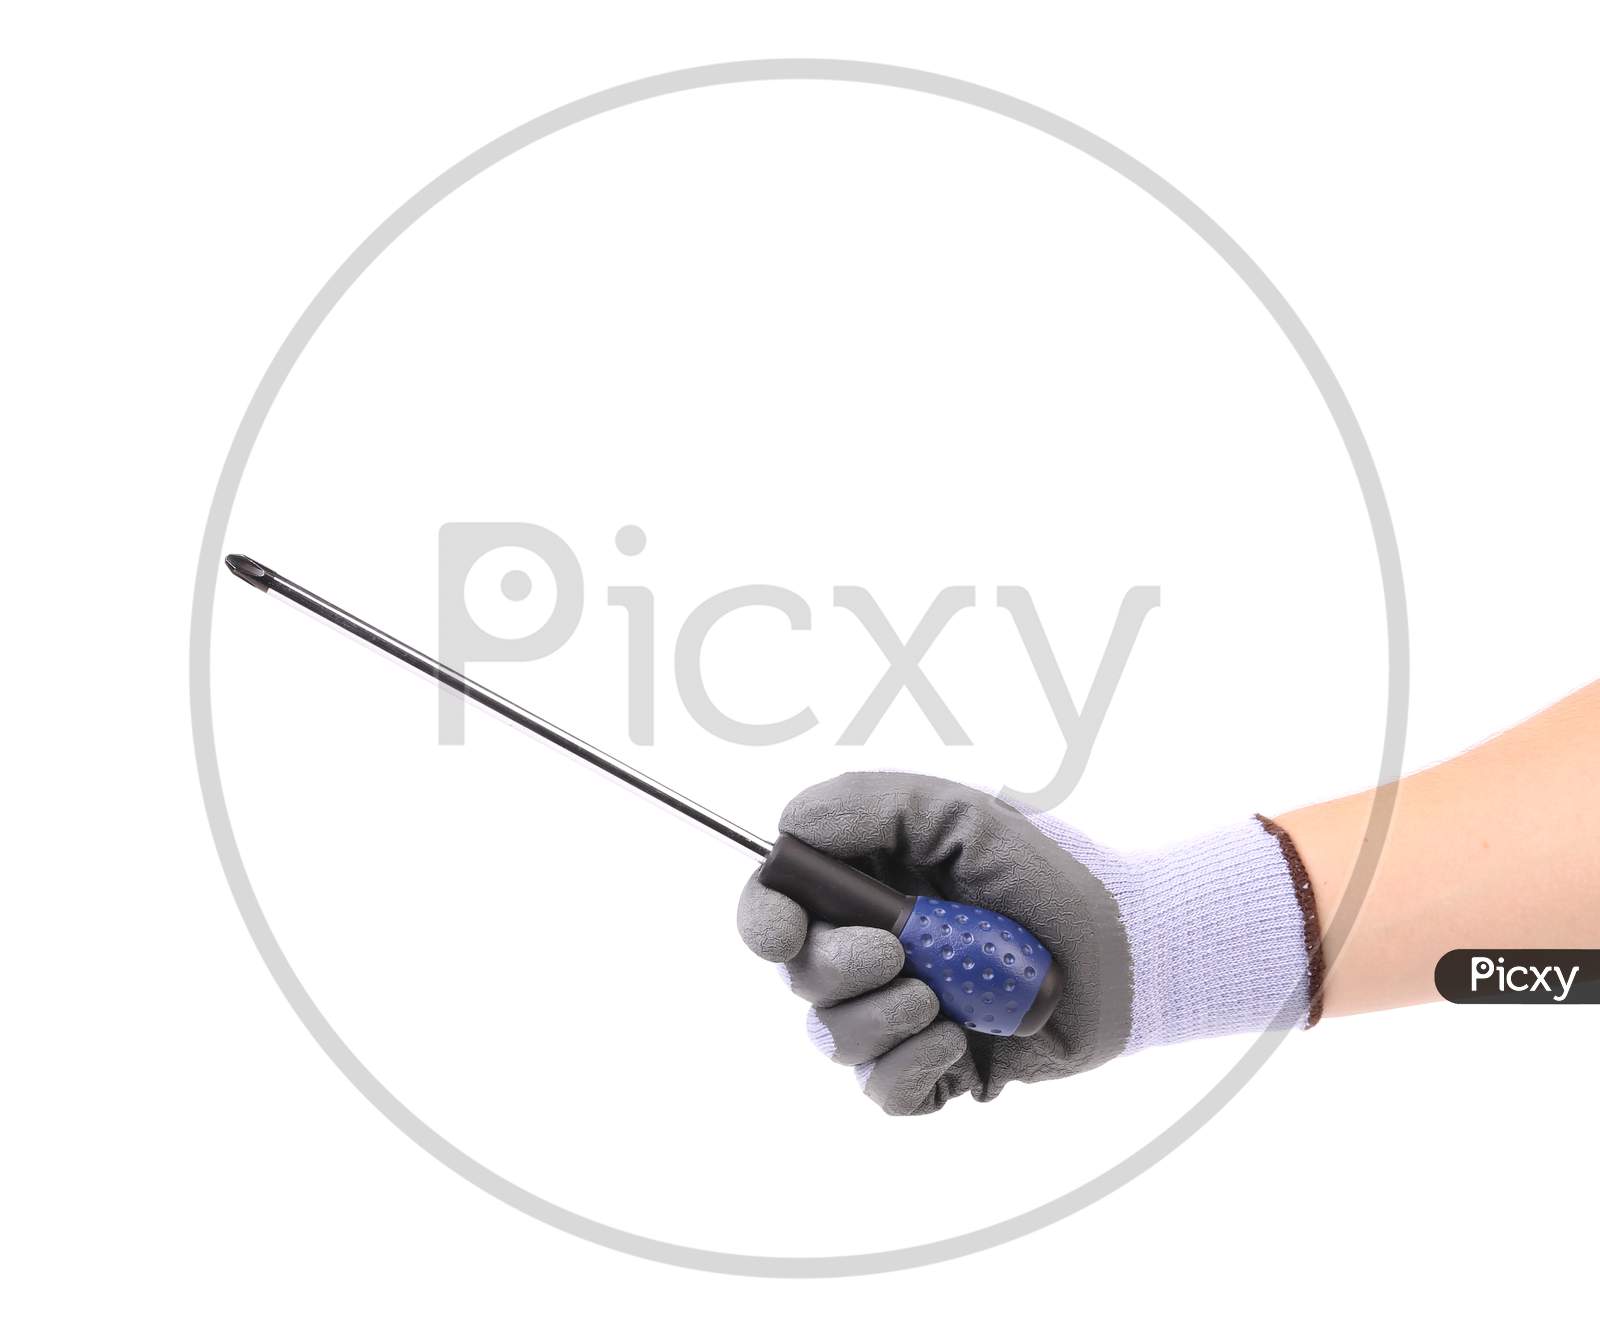 Hand In Glove Holding Screwdriver. Isolated On A White Background.